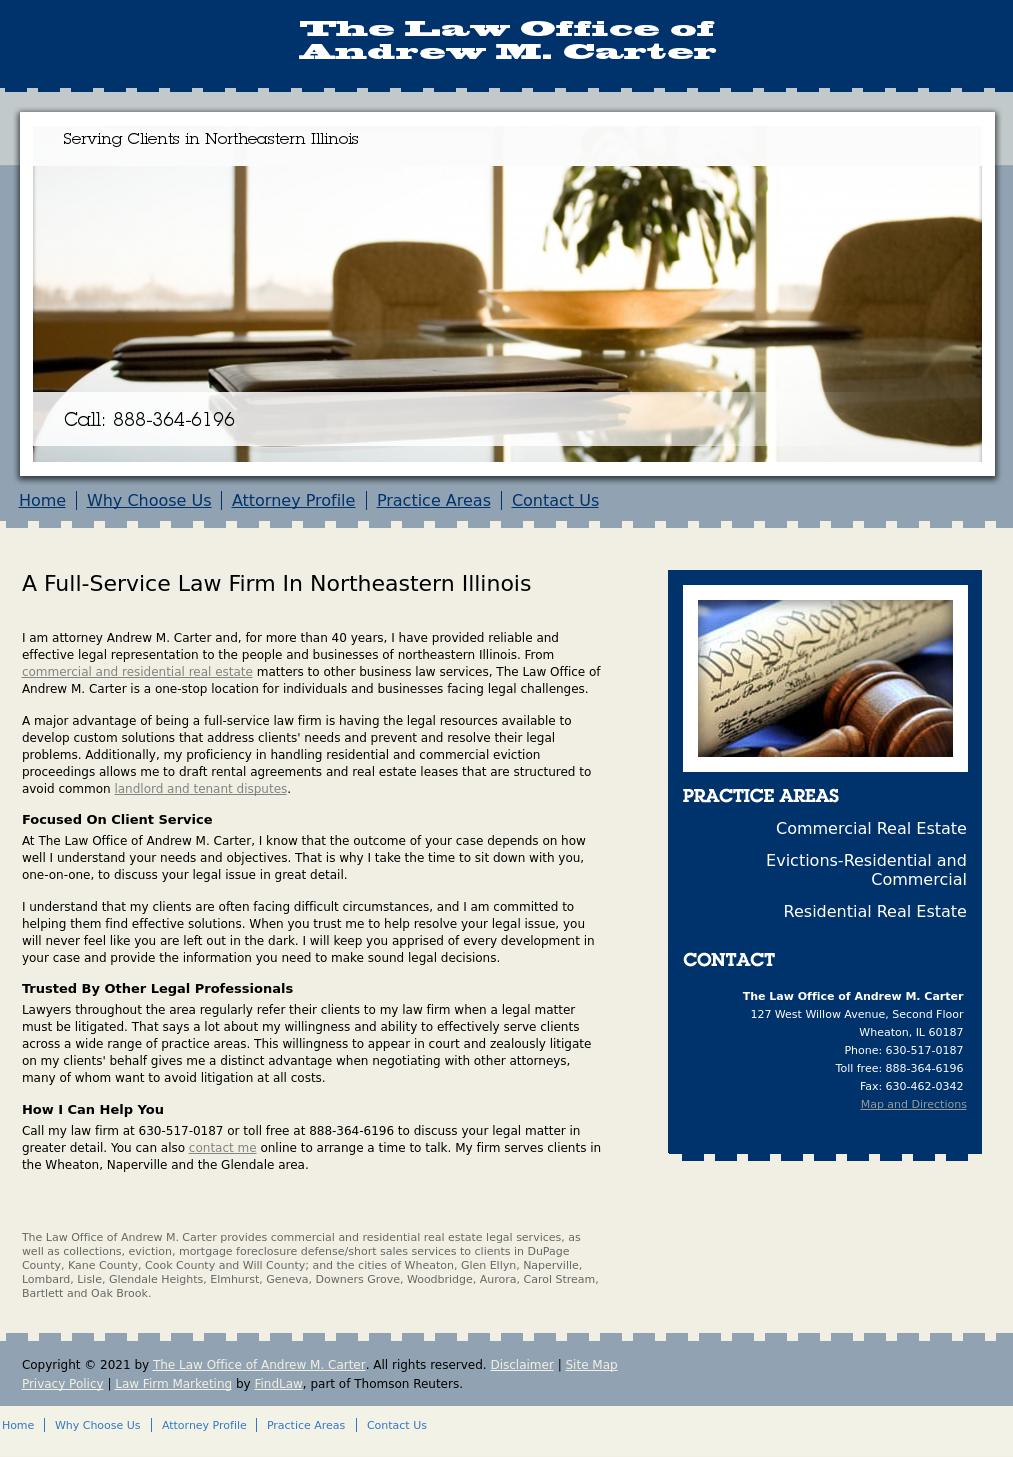 The Law Office of Andrew M. Carter - Wheaton IL Lawyers